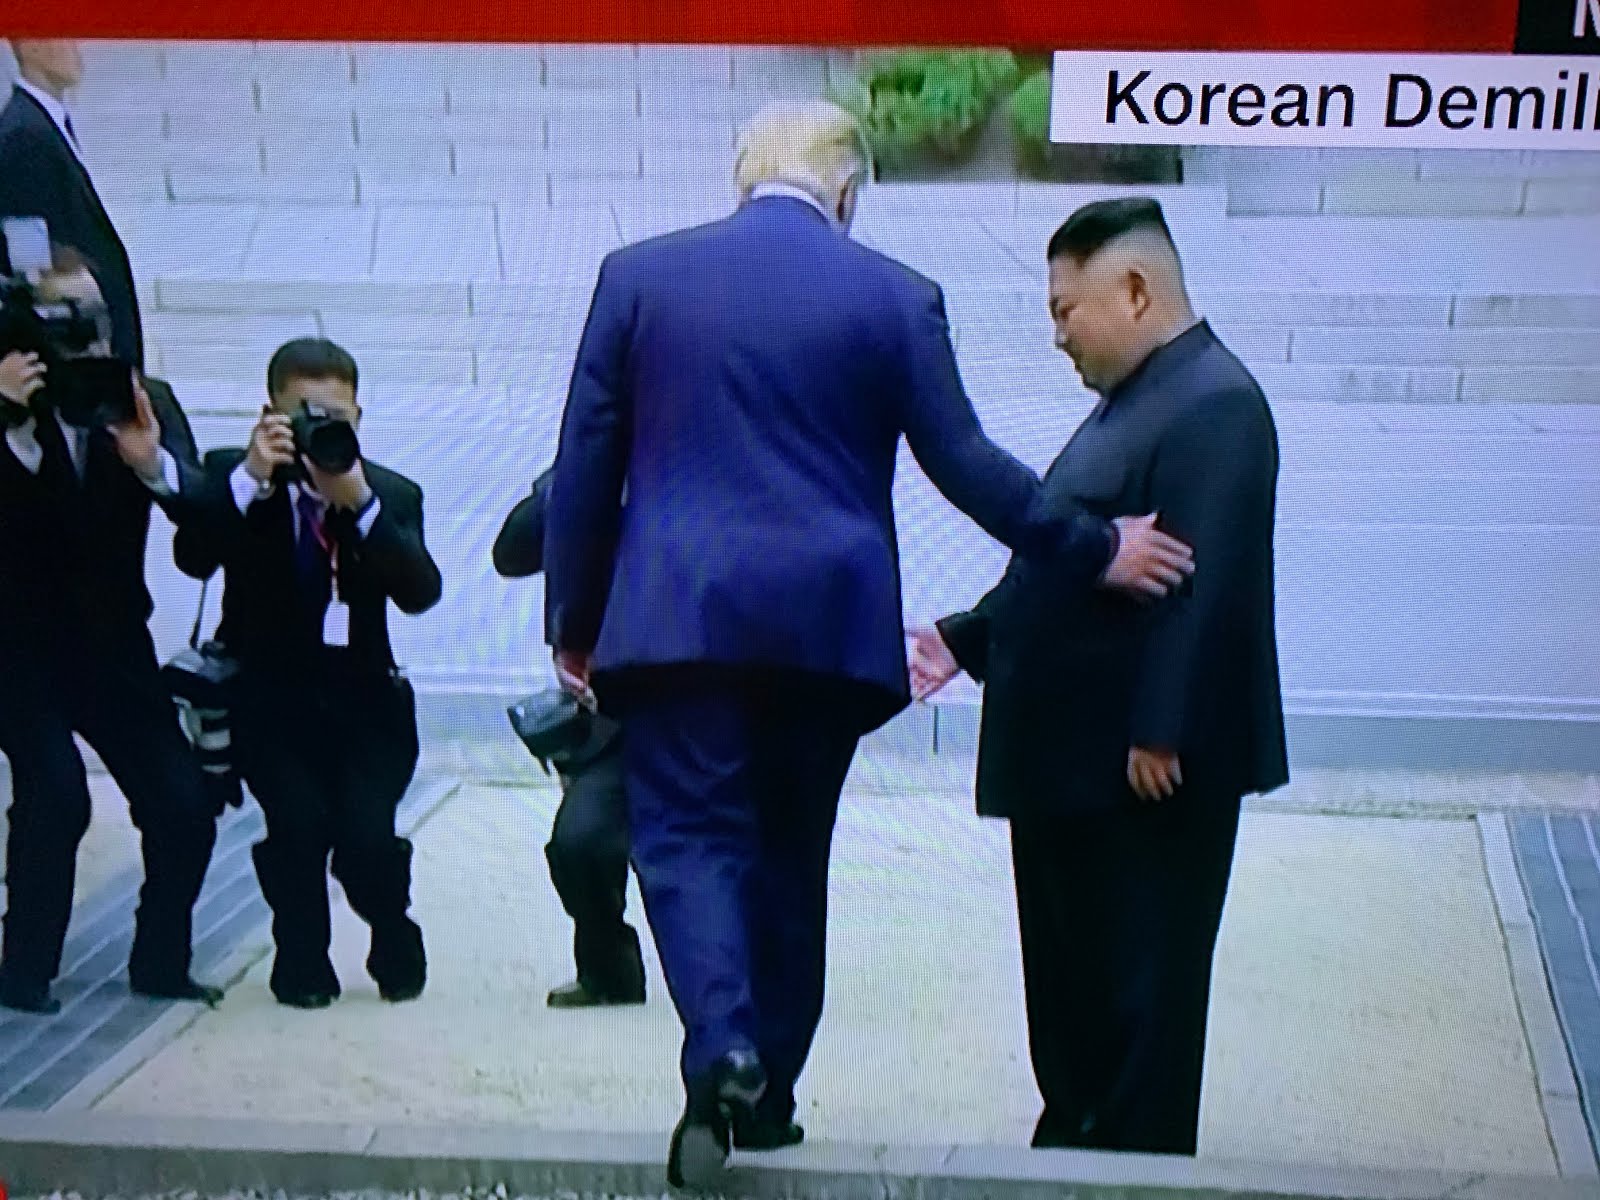 TRUMP STEPS INTO North Korea: WATCHED BY AN ADMIRING KIM.